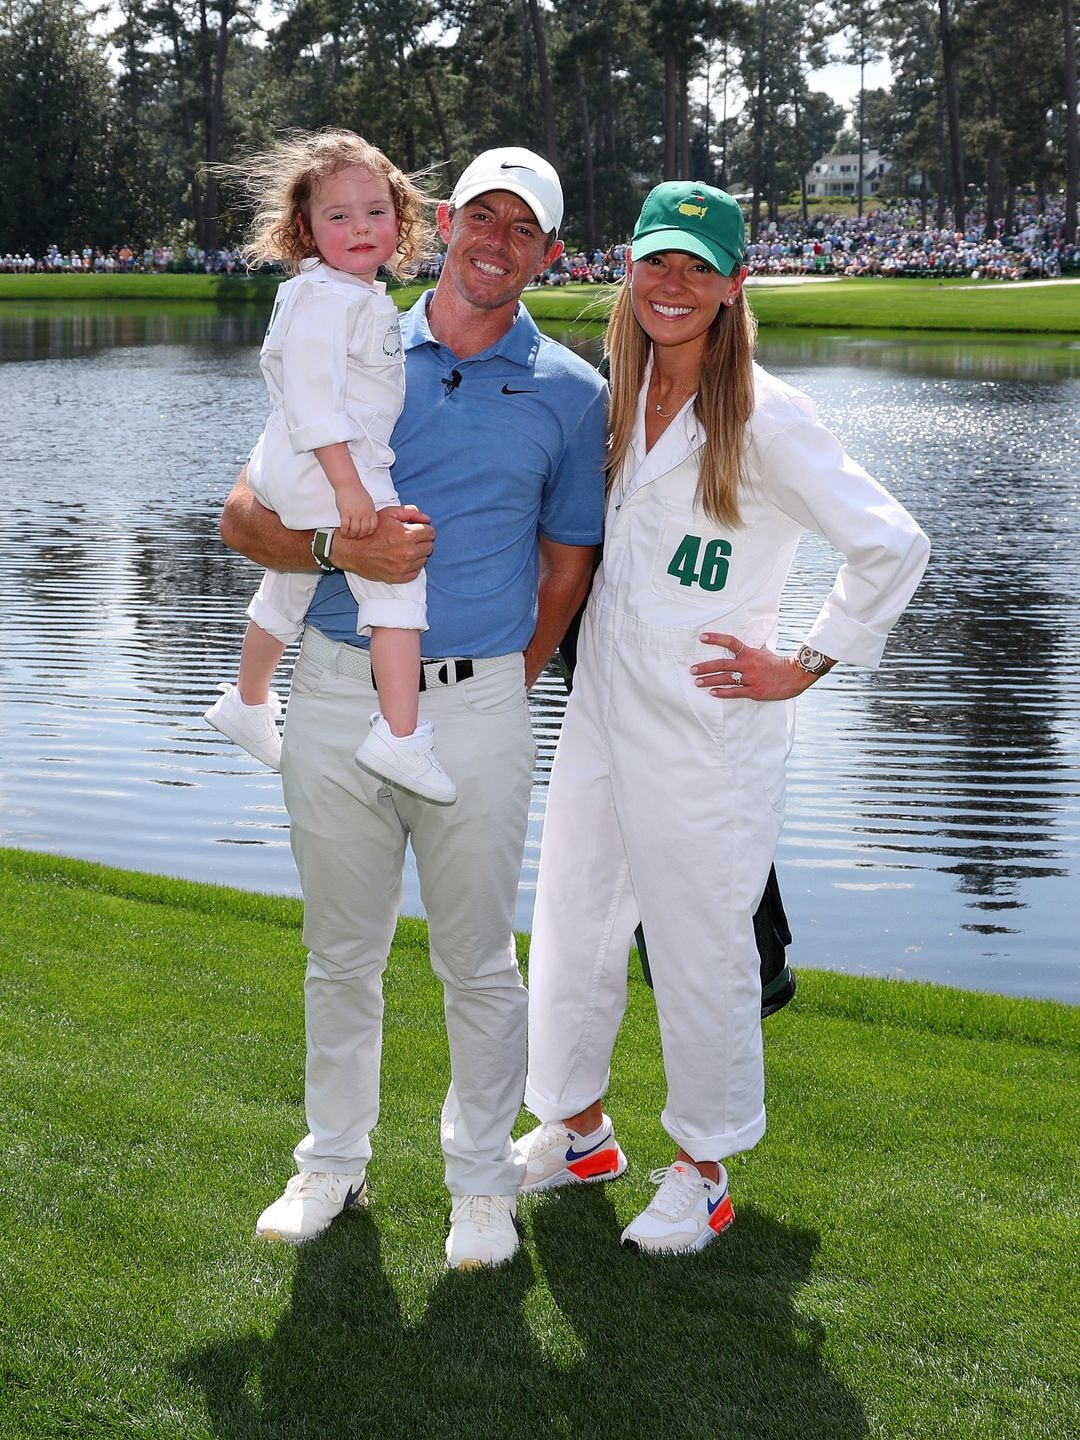 Rory McIlroy with his wife Erica Stoll and daughter Poppy McIlroy stood smiling on a golf course a lake behind them